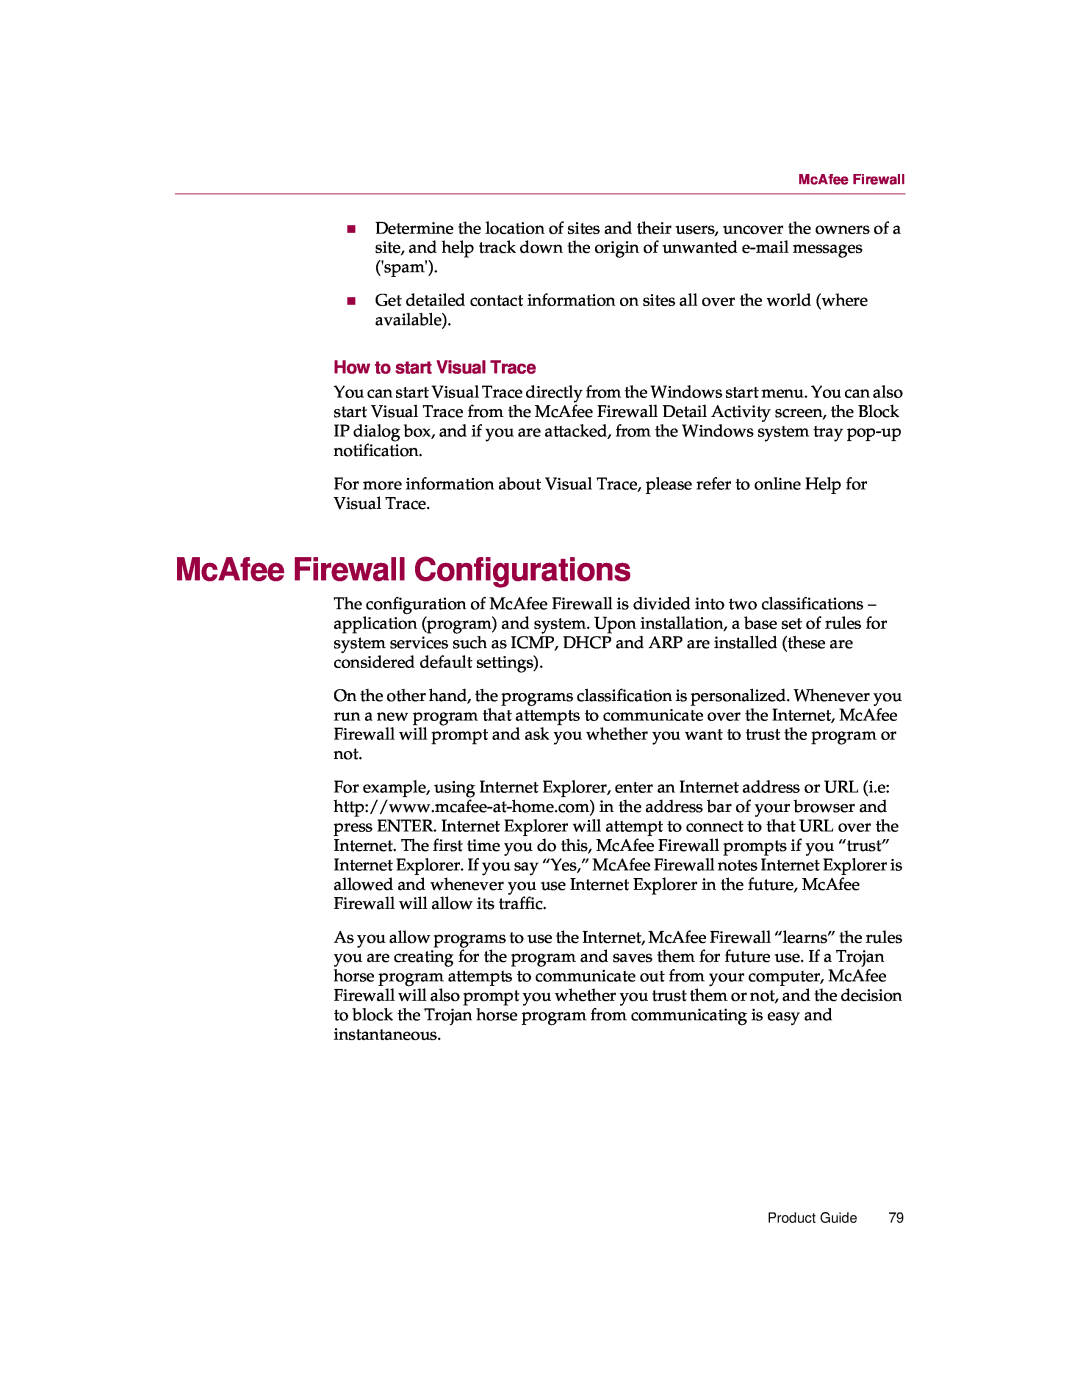 McAfee 5 manual McAfee Firewall Configurations, How to start Visual Trace 